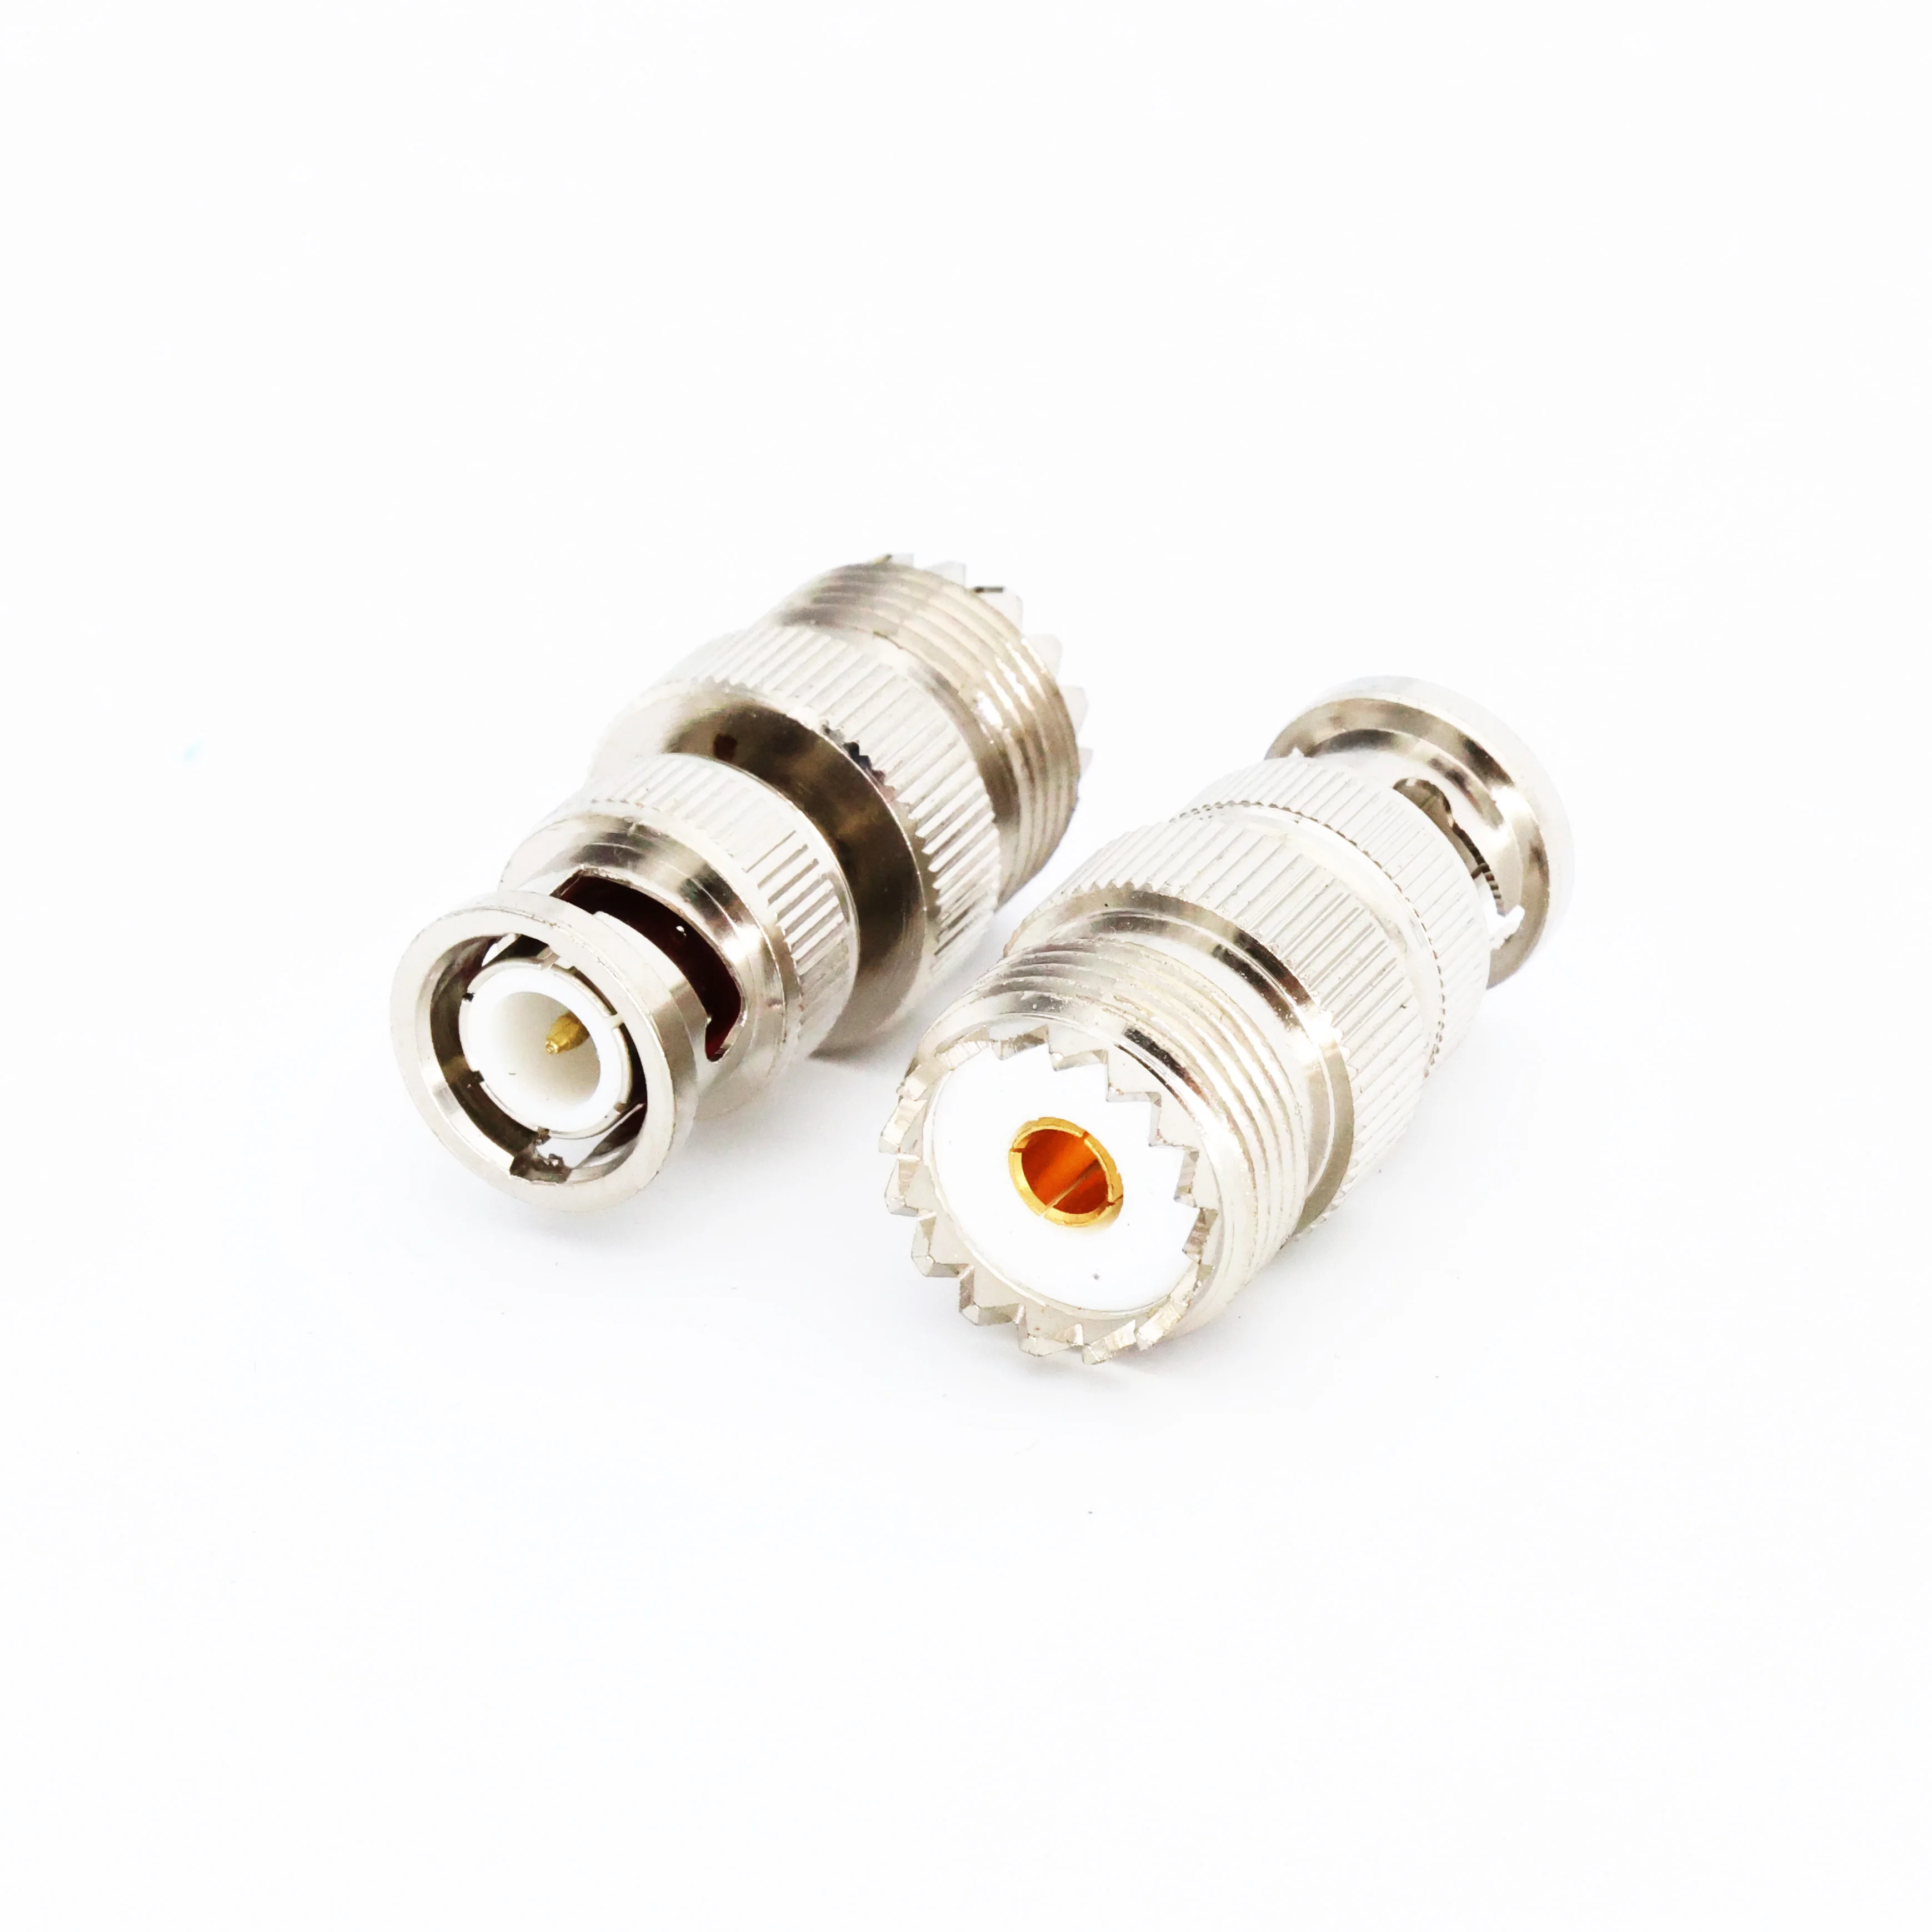 2pcs Cleqee BNC Male to UHF SO239 PL-259 Female RF Coaxial Adapter BNC to UHF Coax Jack Connector 2pcs antenna cable connector 300 to 75 ohm coaxial cable matching